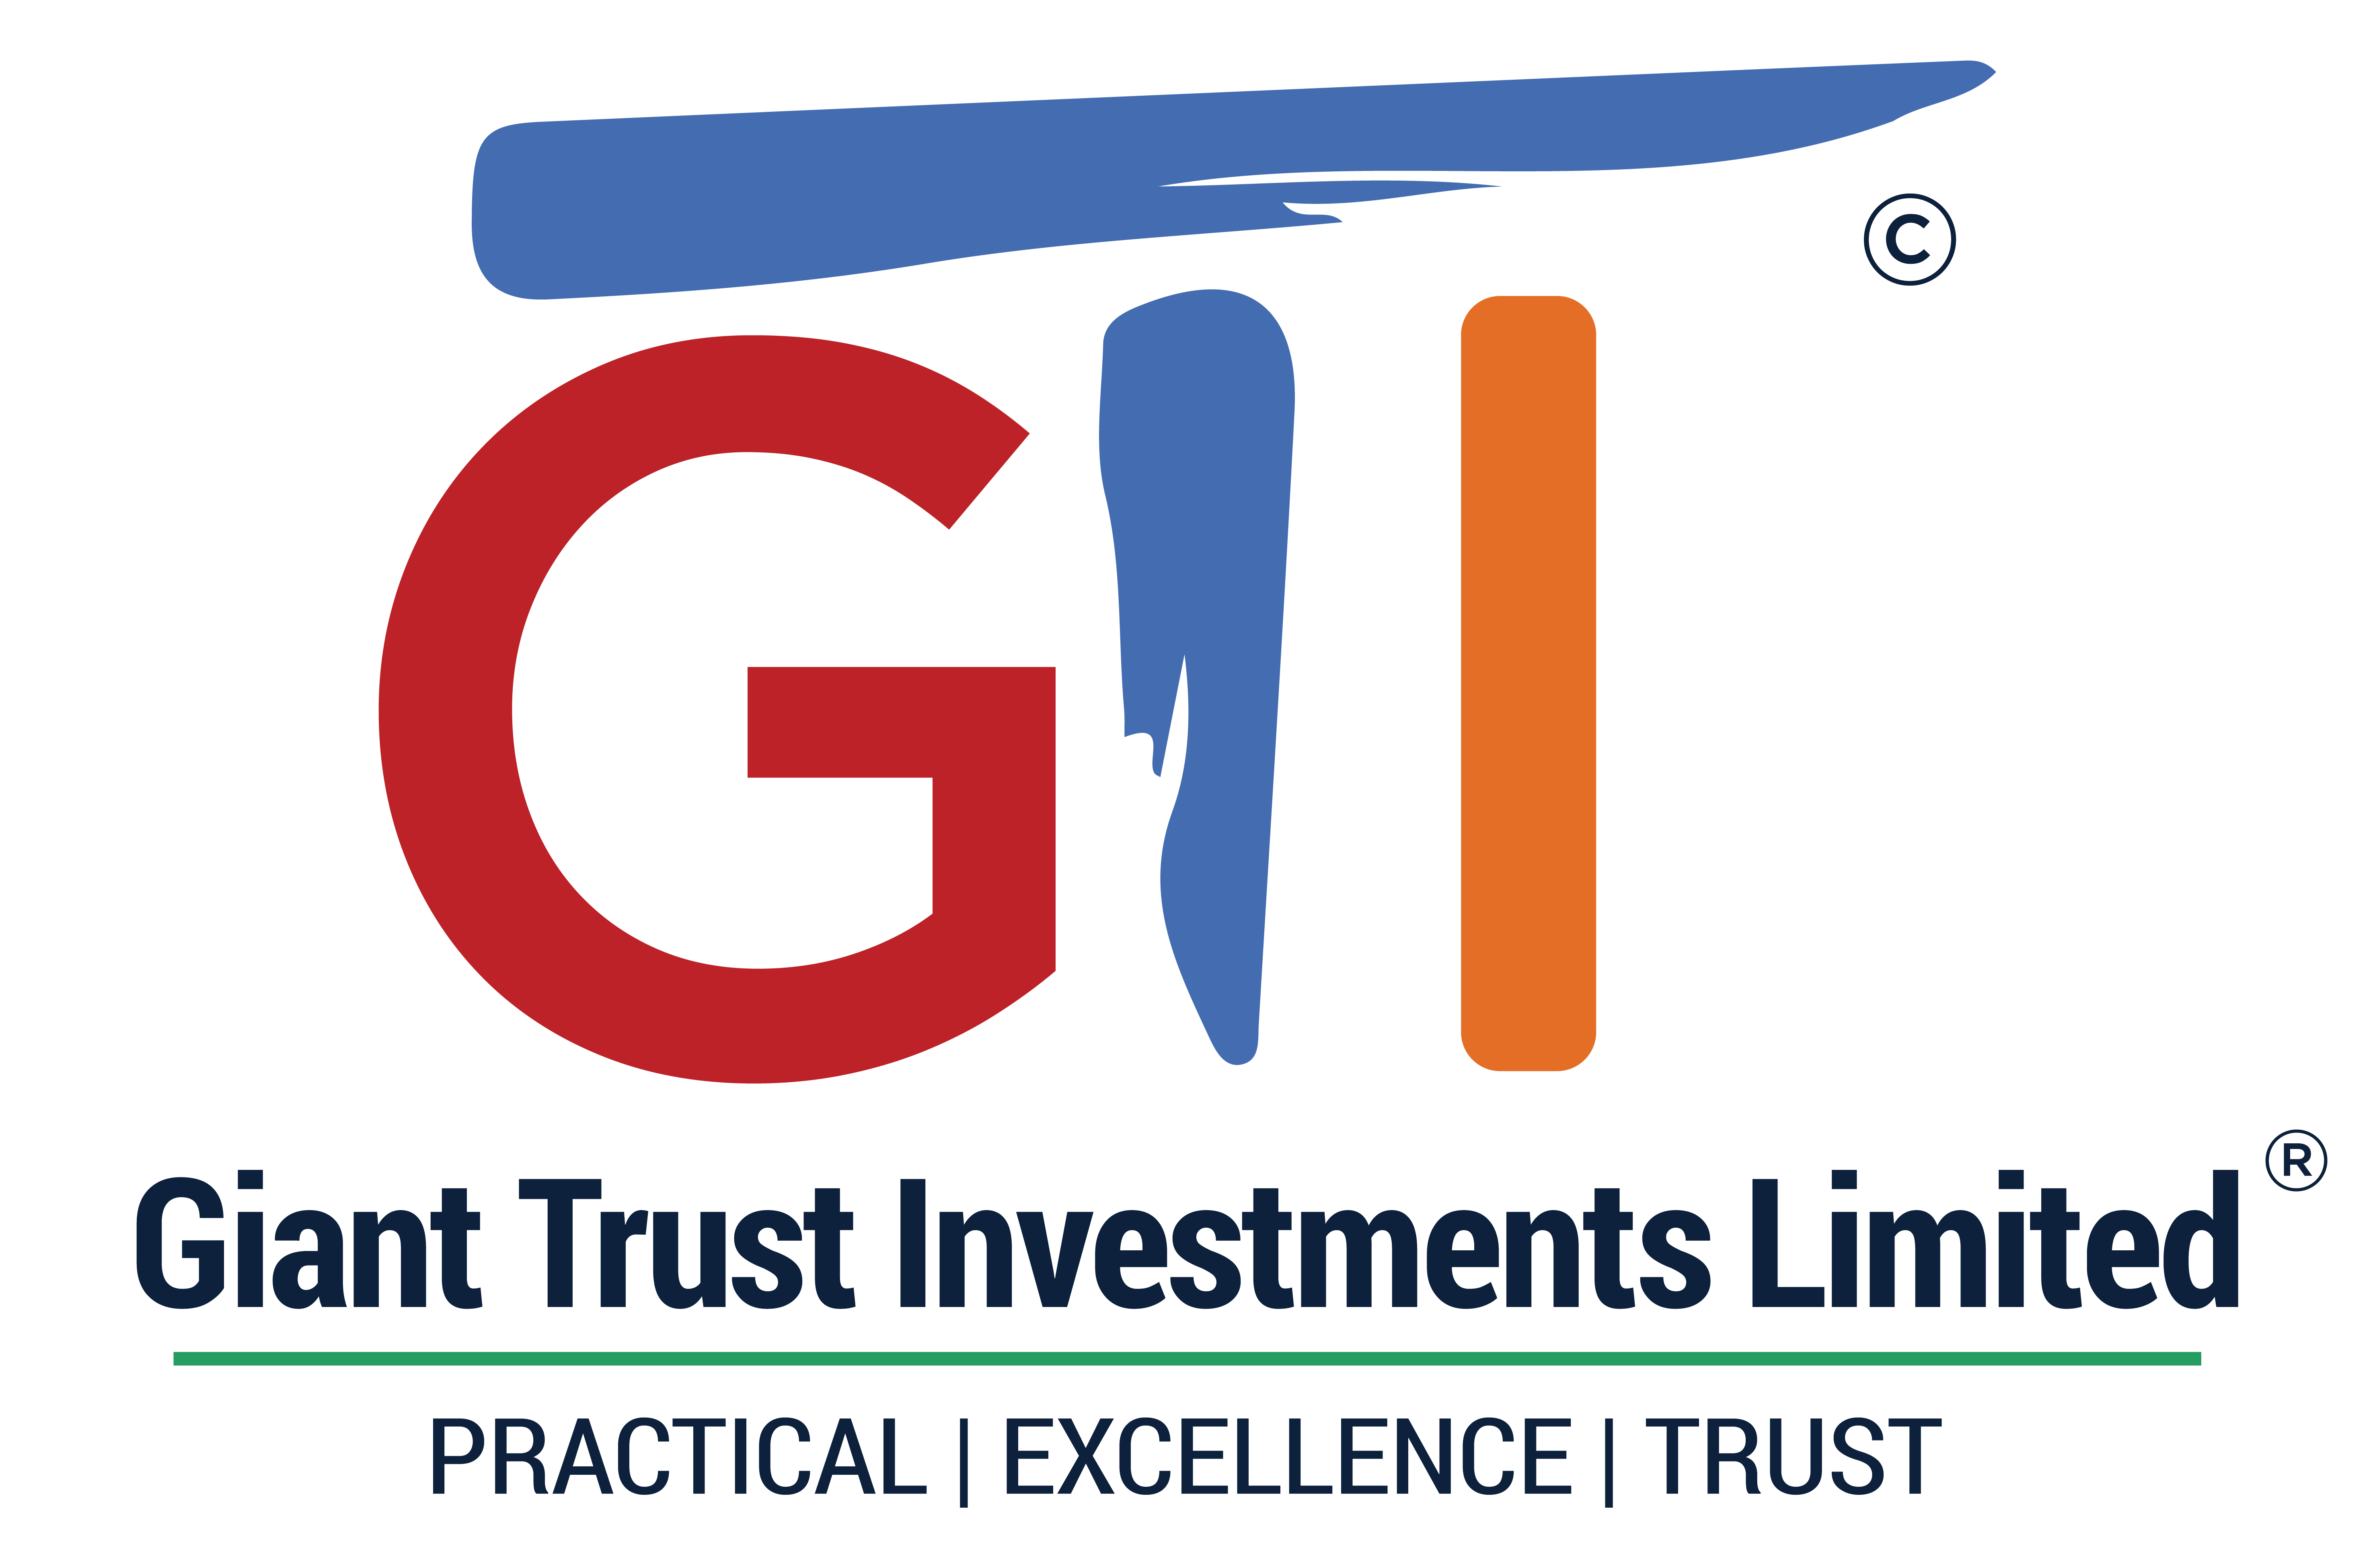 Giant Trust Investments Limited (GTIL)